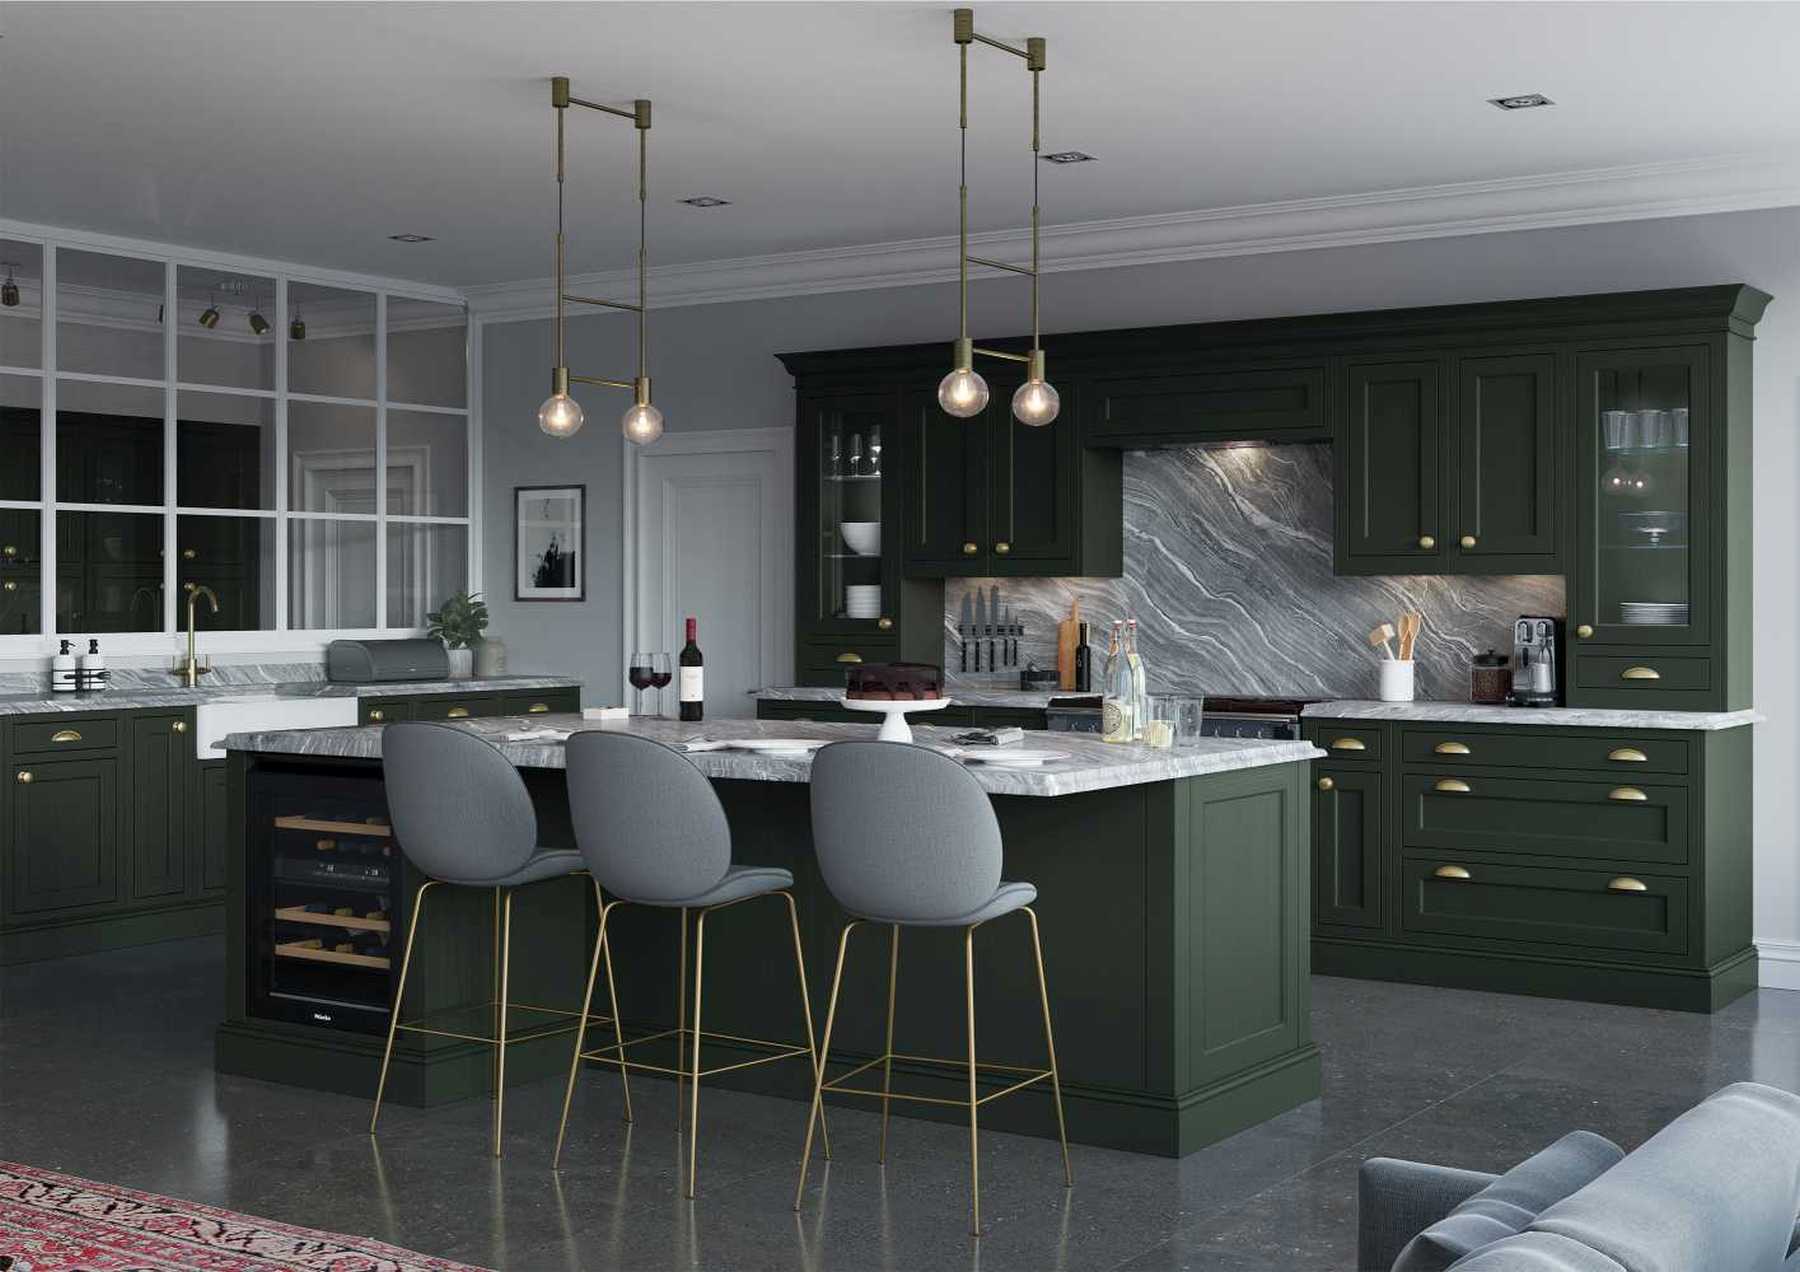 Luxurious inframe kitchen in forest green island pic 2